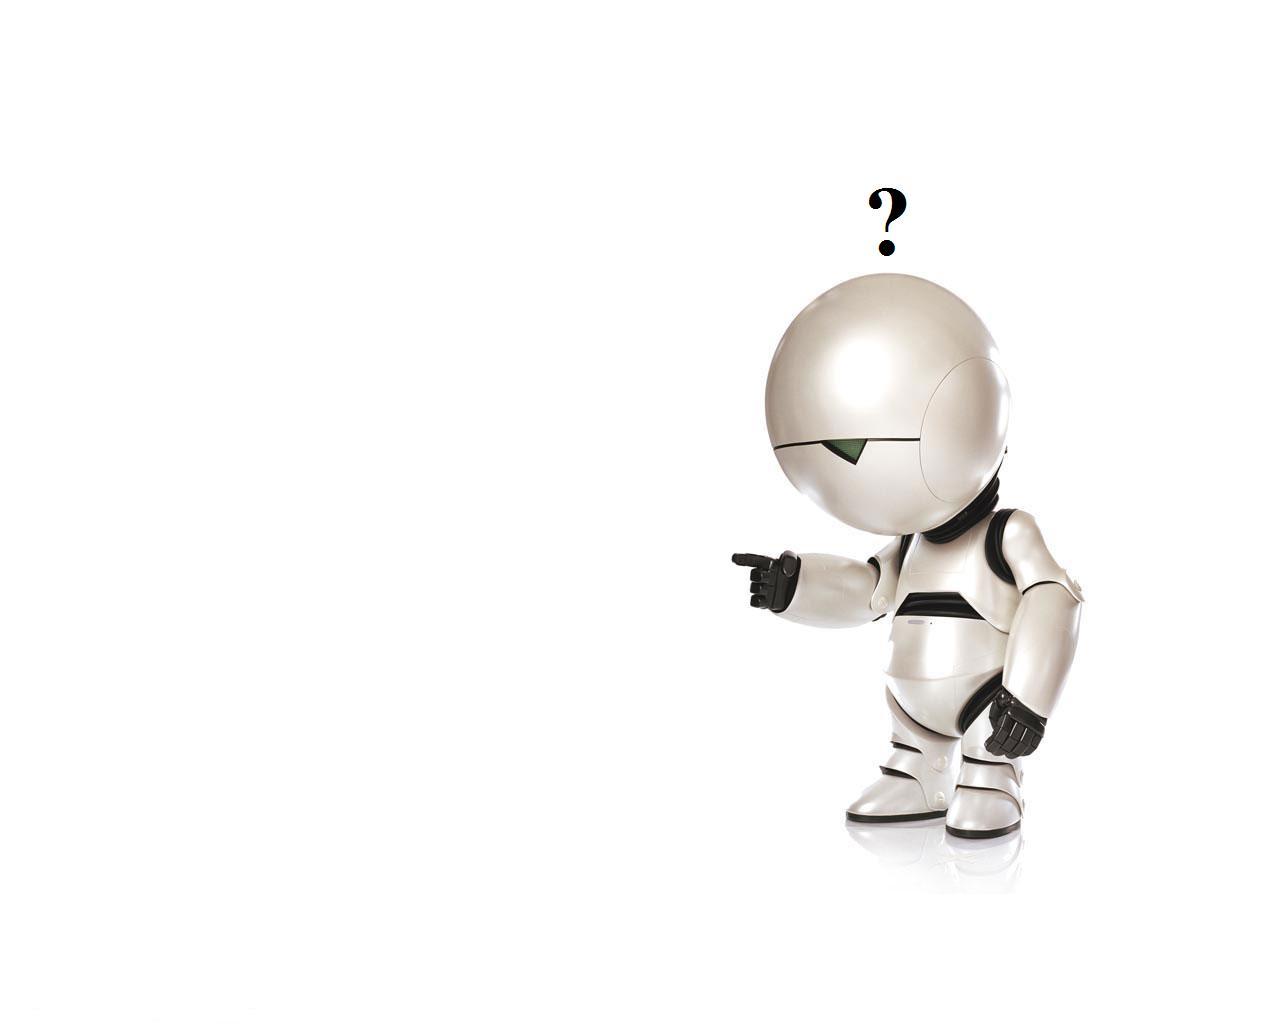  robot graphical design simple white background with cool 3d kid robot